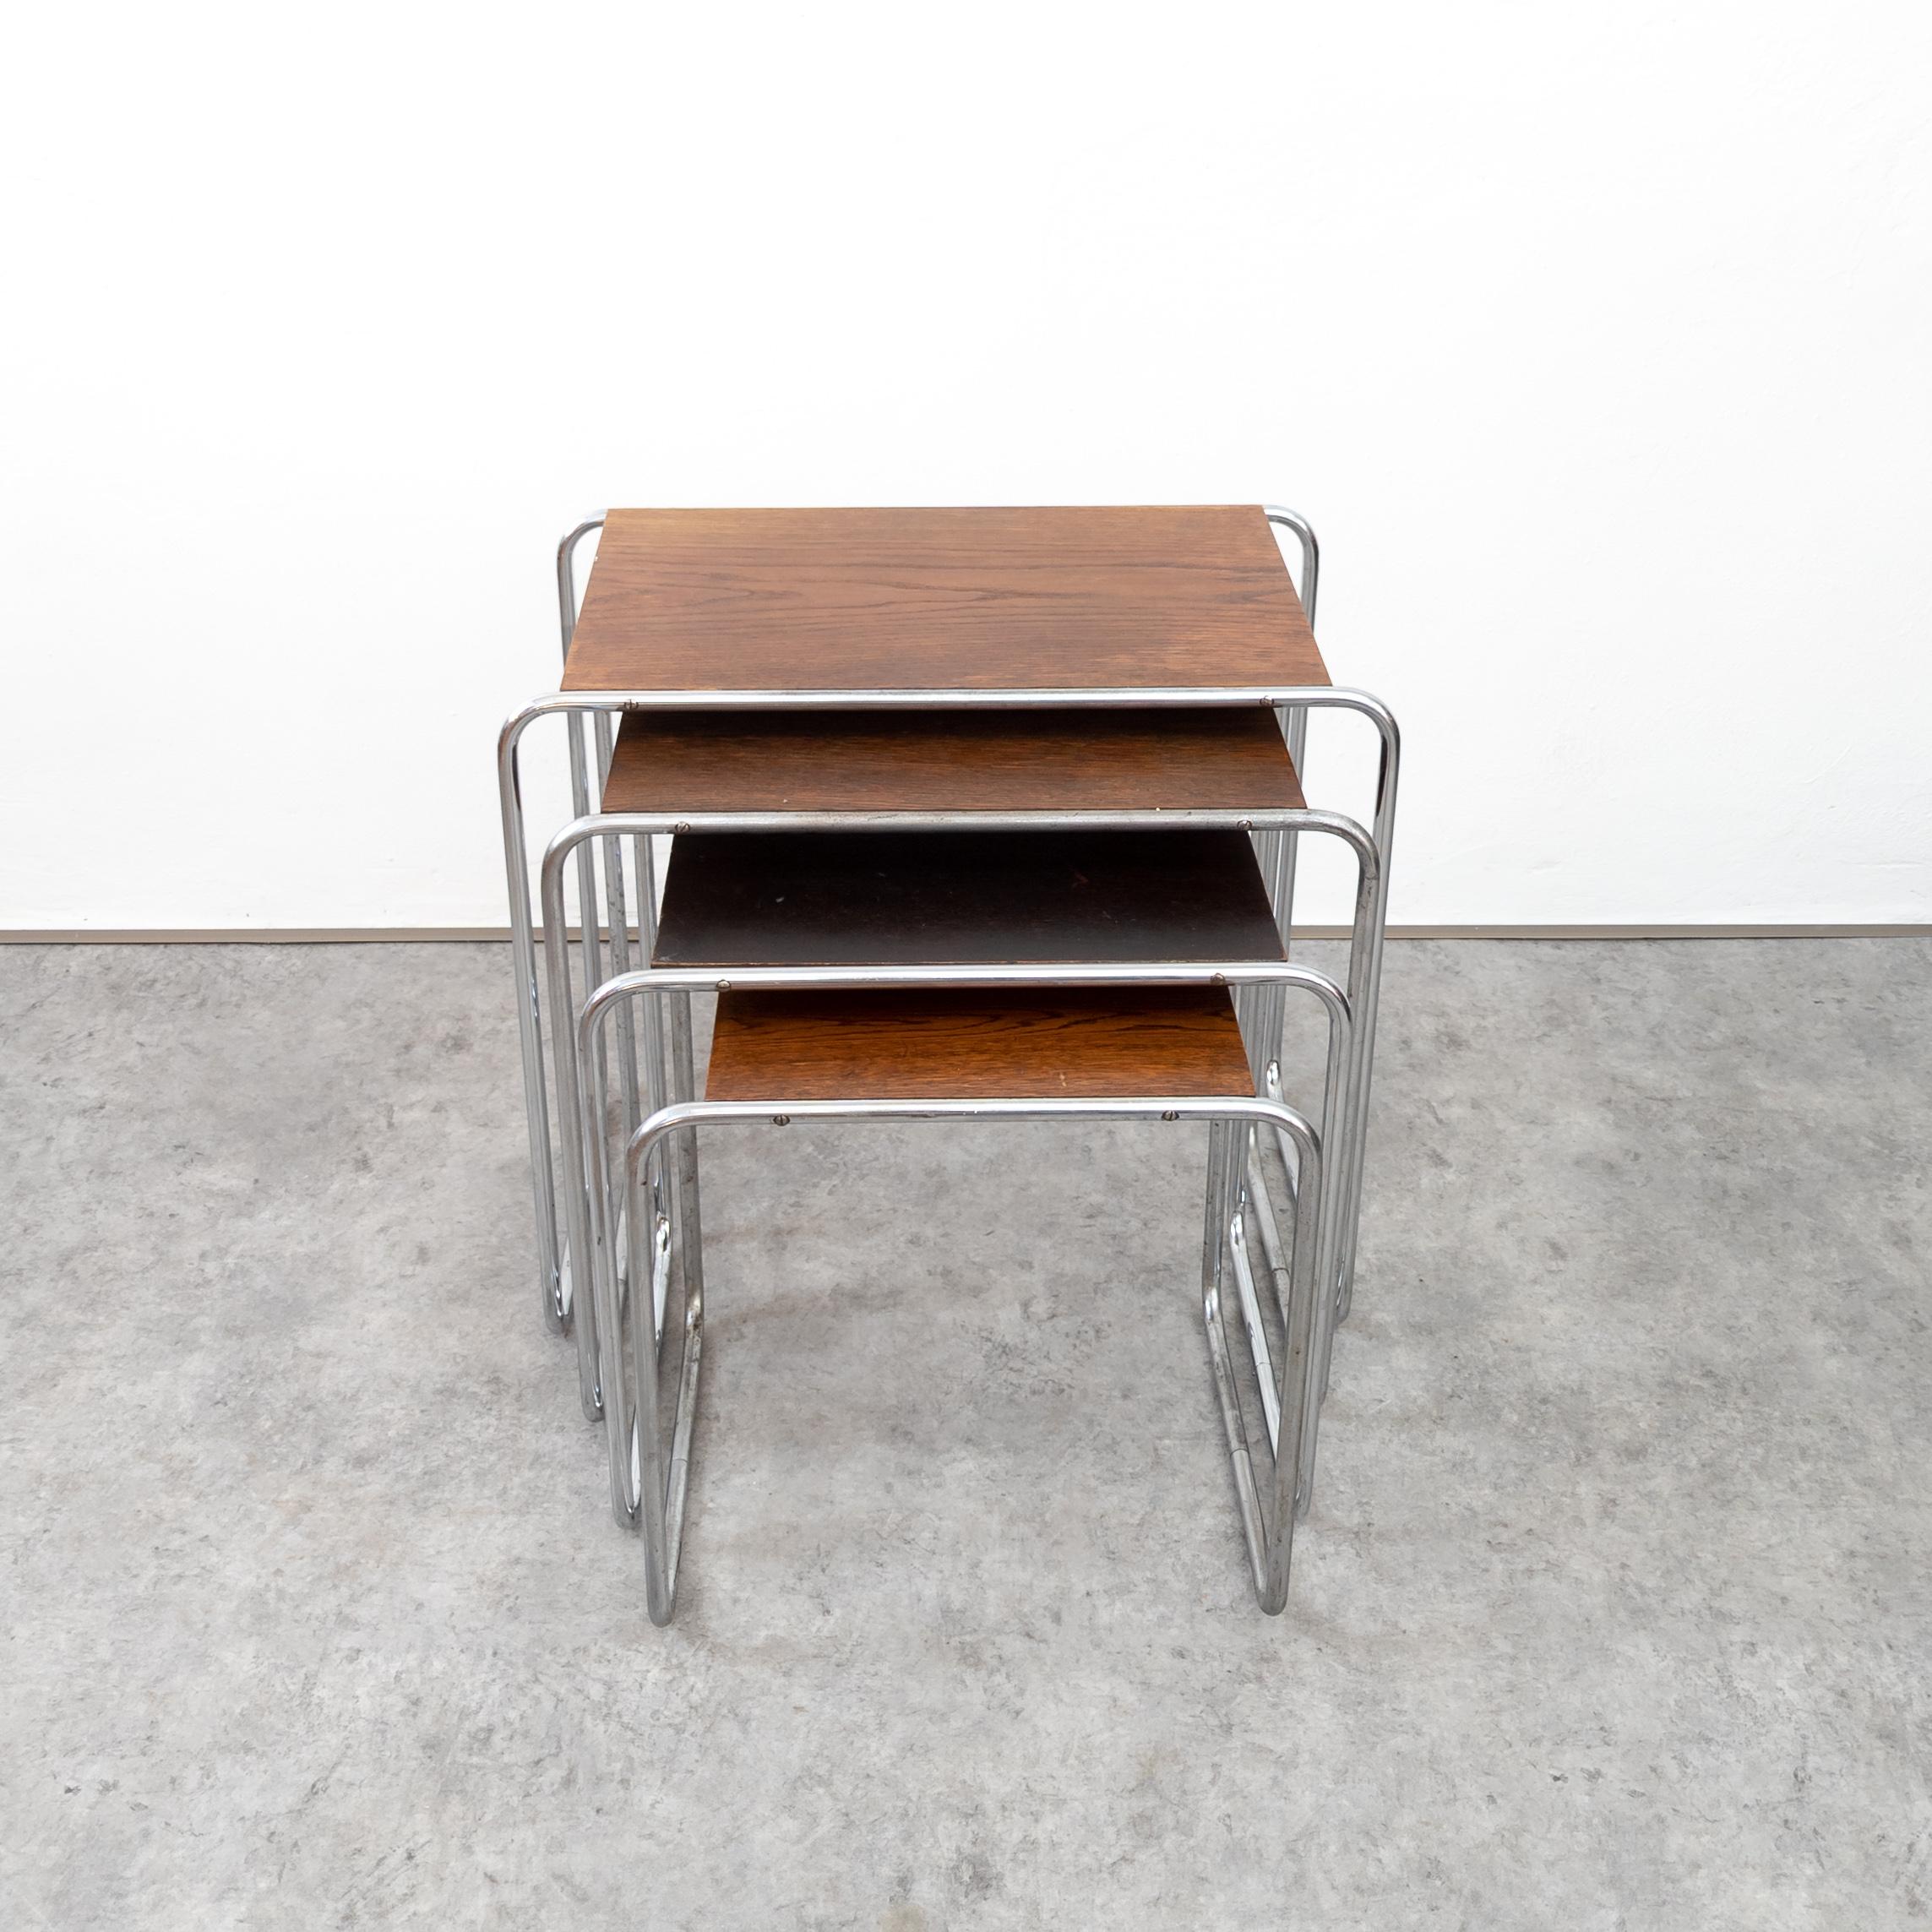 Early 20th Century Early Thonet B 9 Nesting Tables by Marcel Breuer For Sale